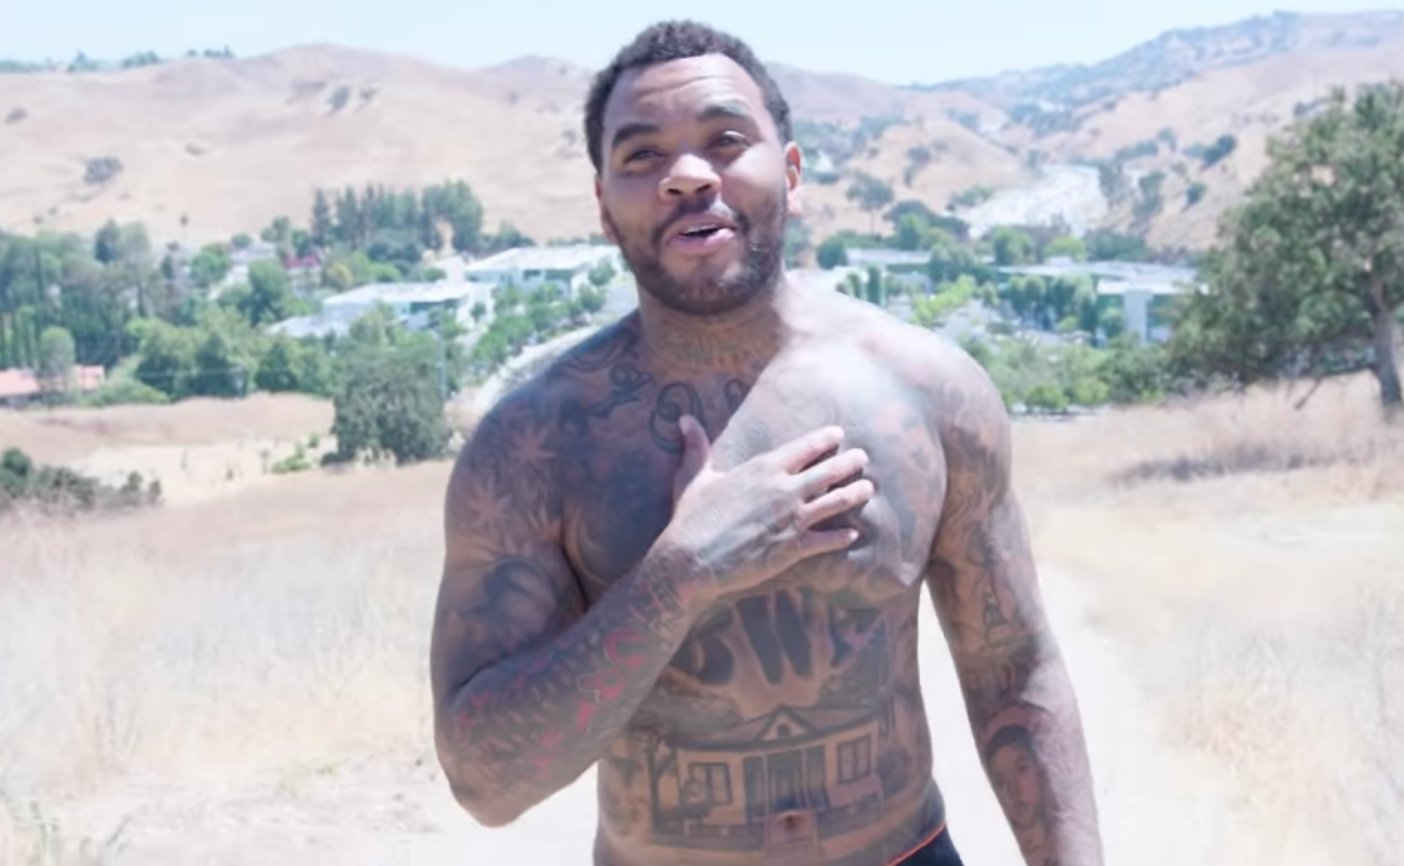 kevin gates weight gain